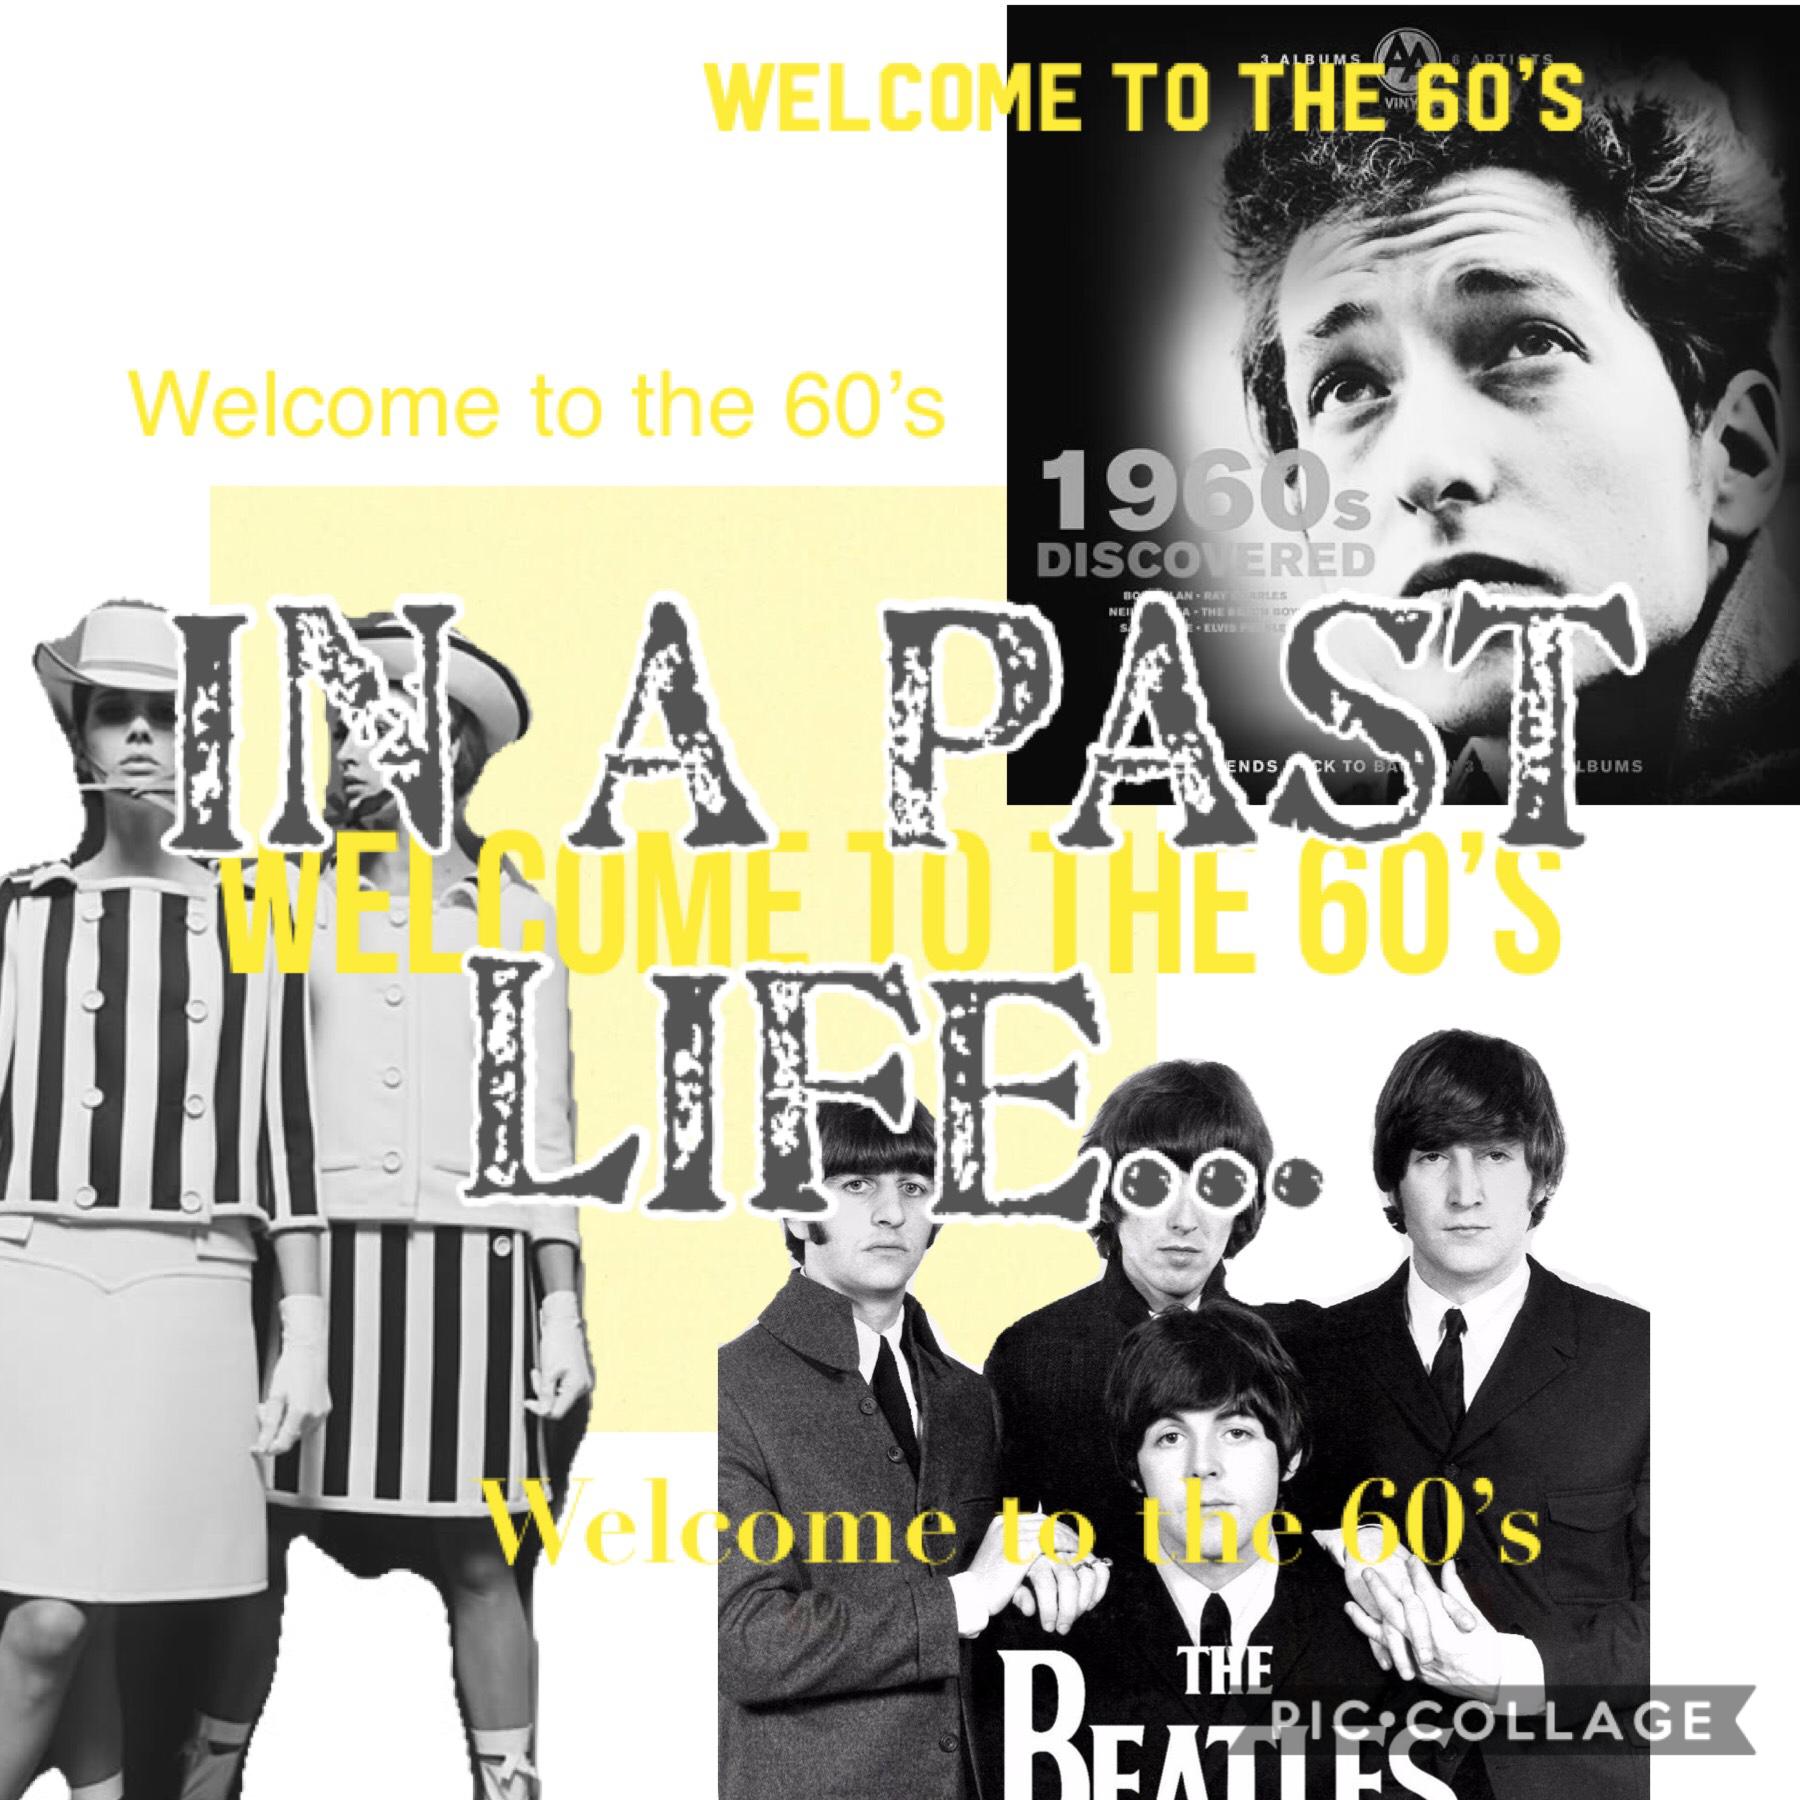 I ❤️the 60s! Comment another decade I could do!